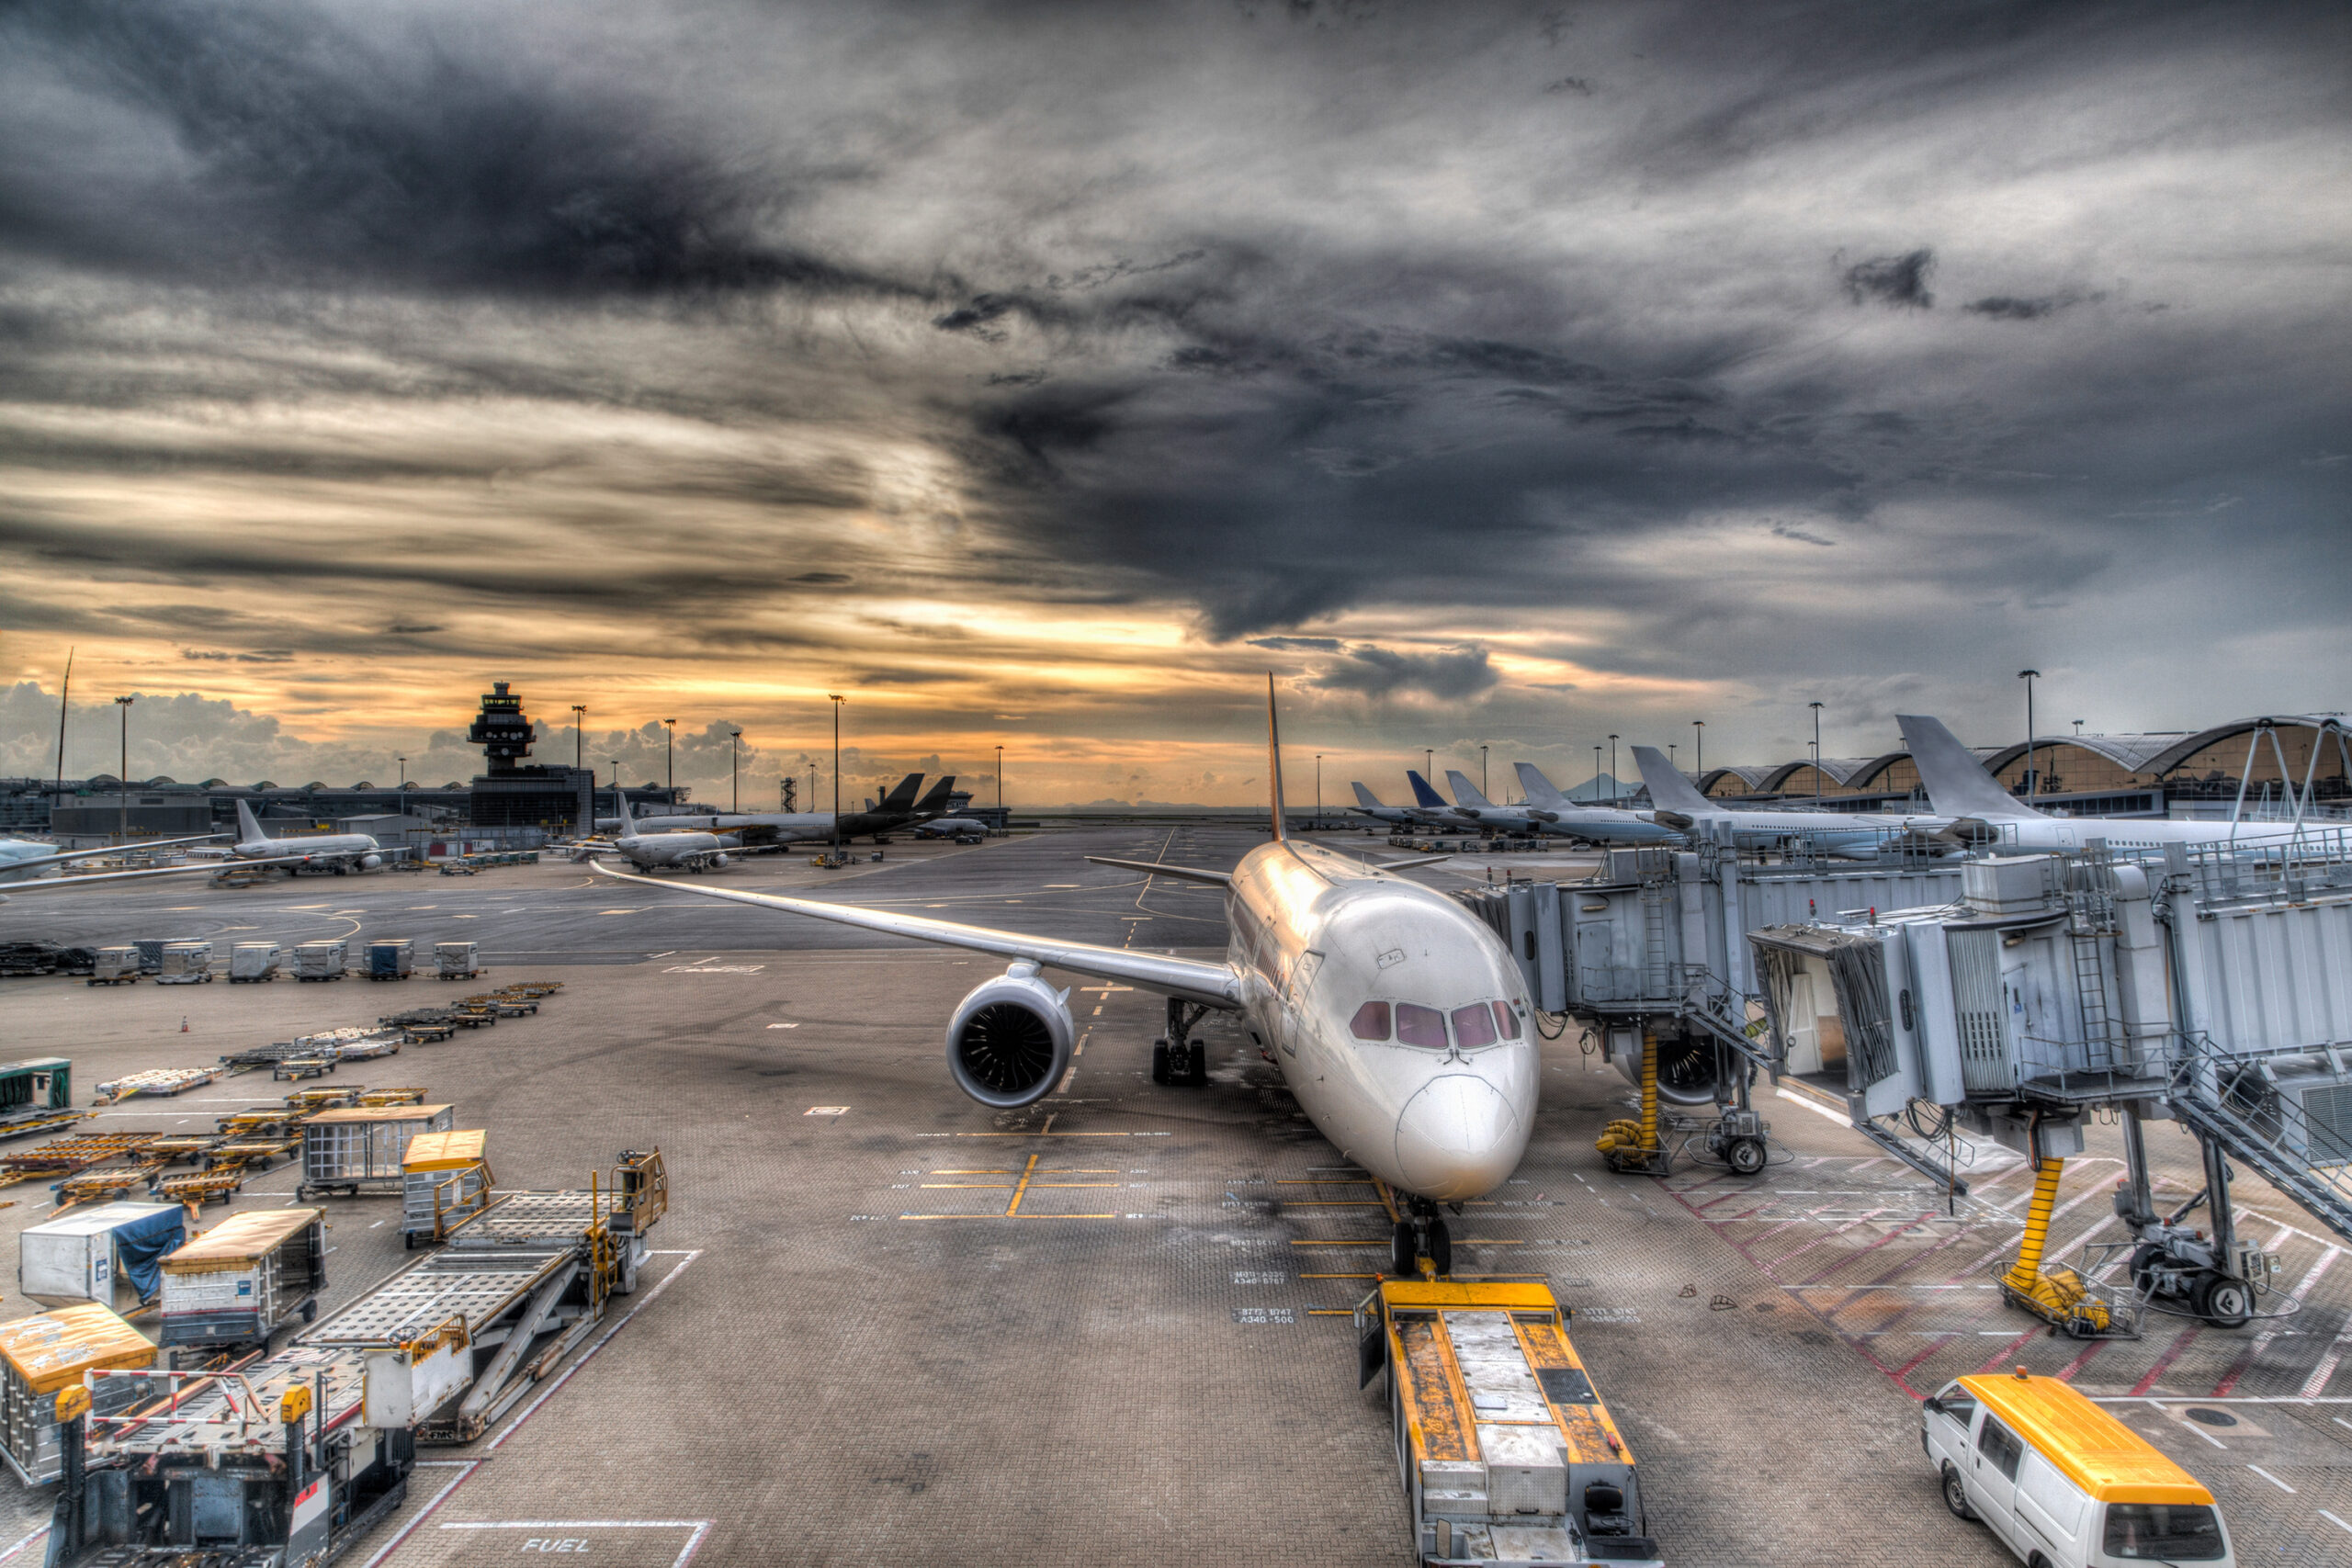 HDR rendering of a golden sunset over Hong Kong International Airport on the island of Chek Lap Kok.